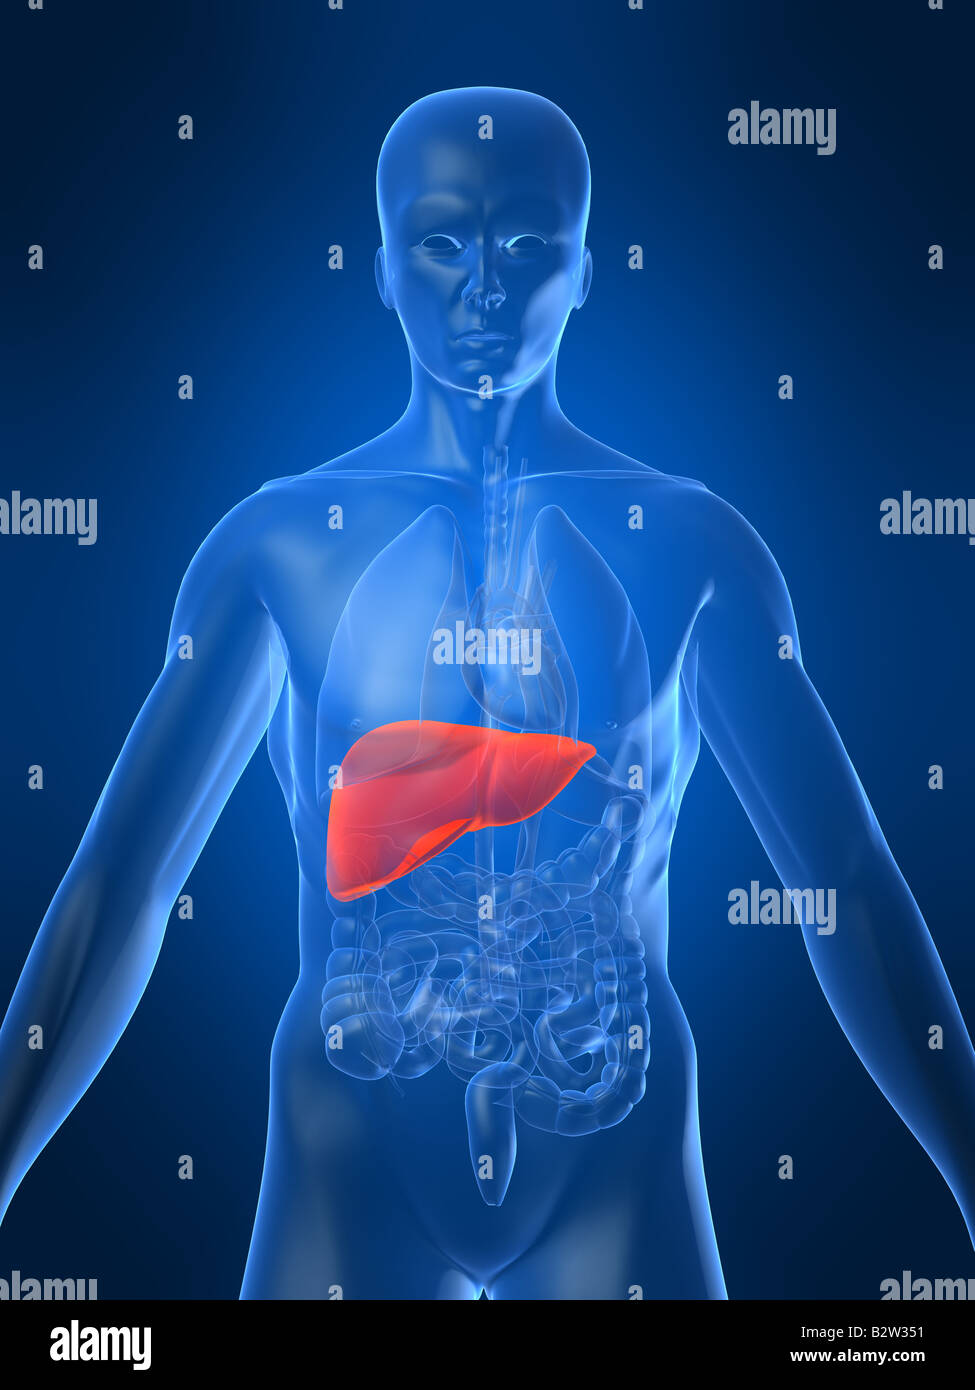 Healthy Human Liver High Resolution Stock Photography and Images - Alamy